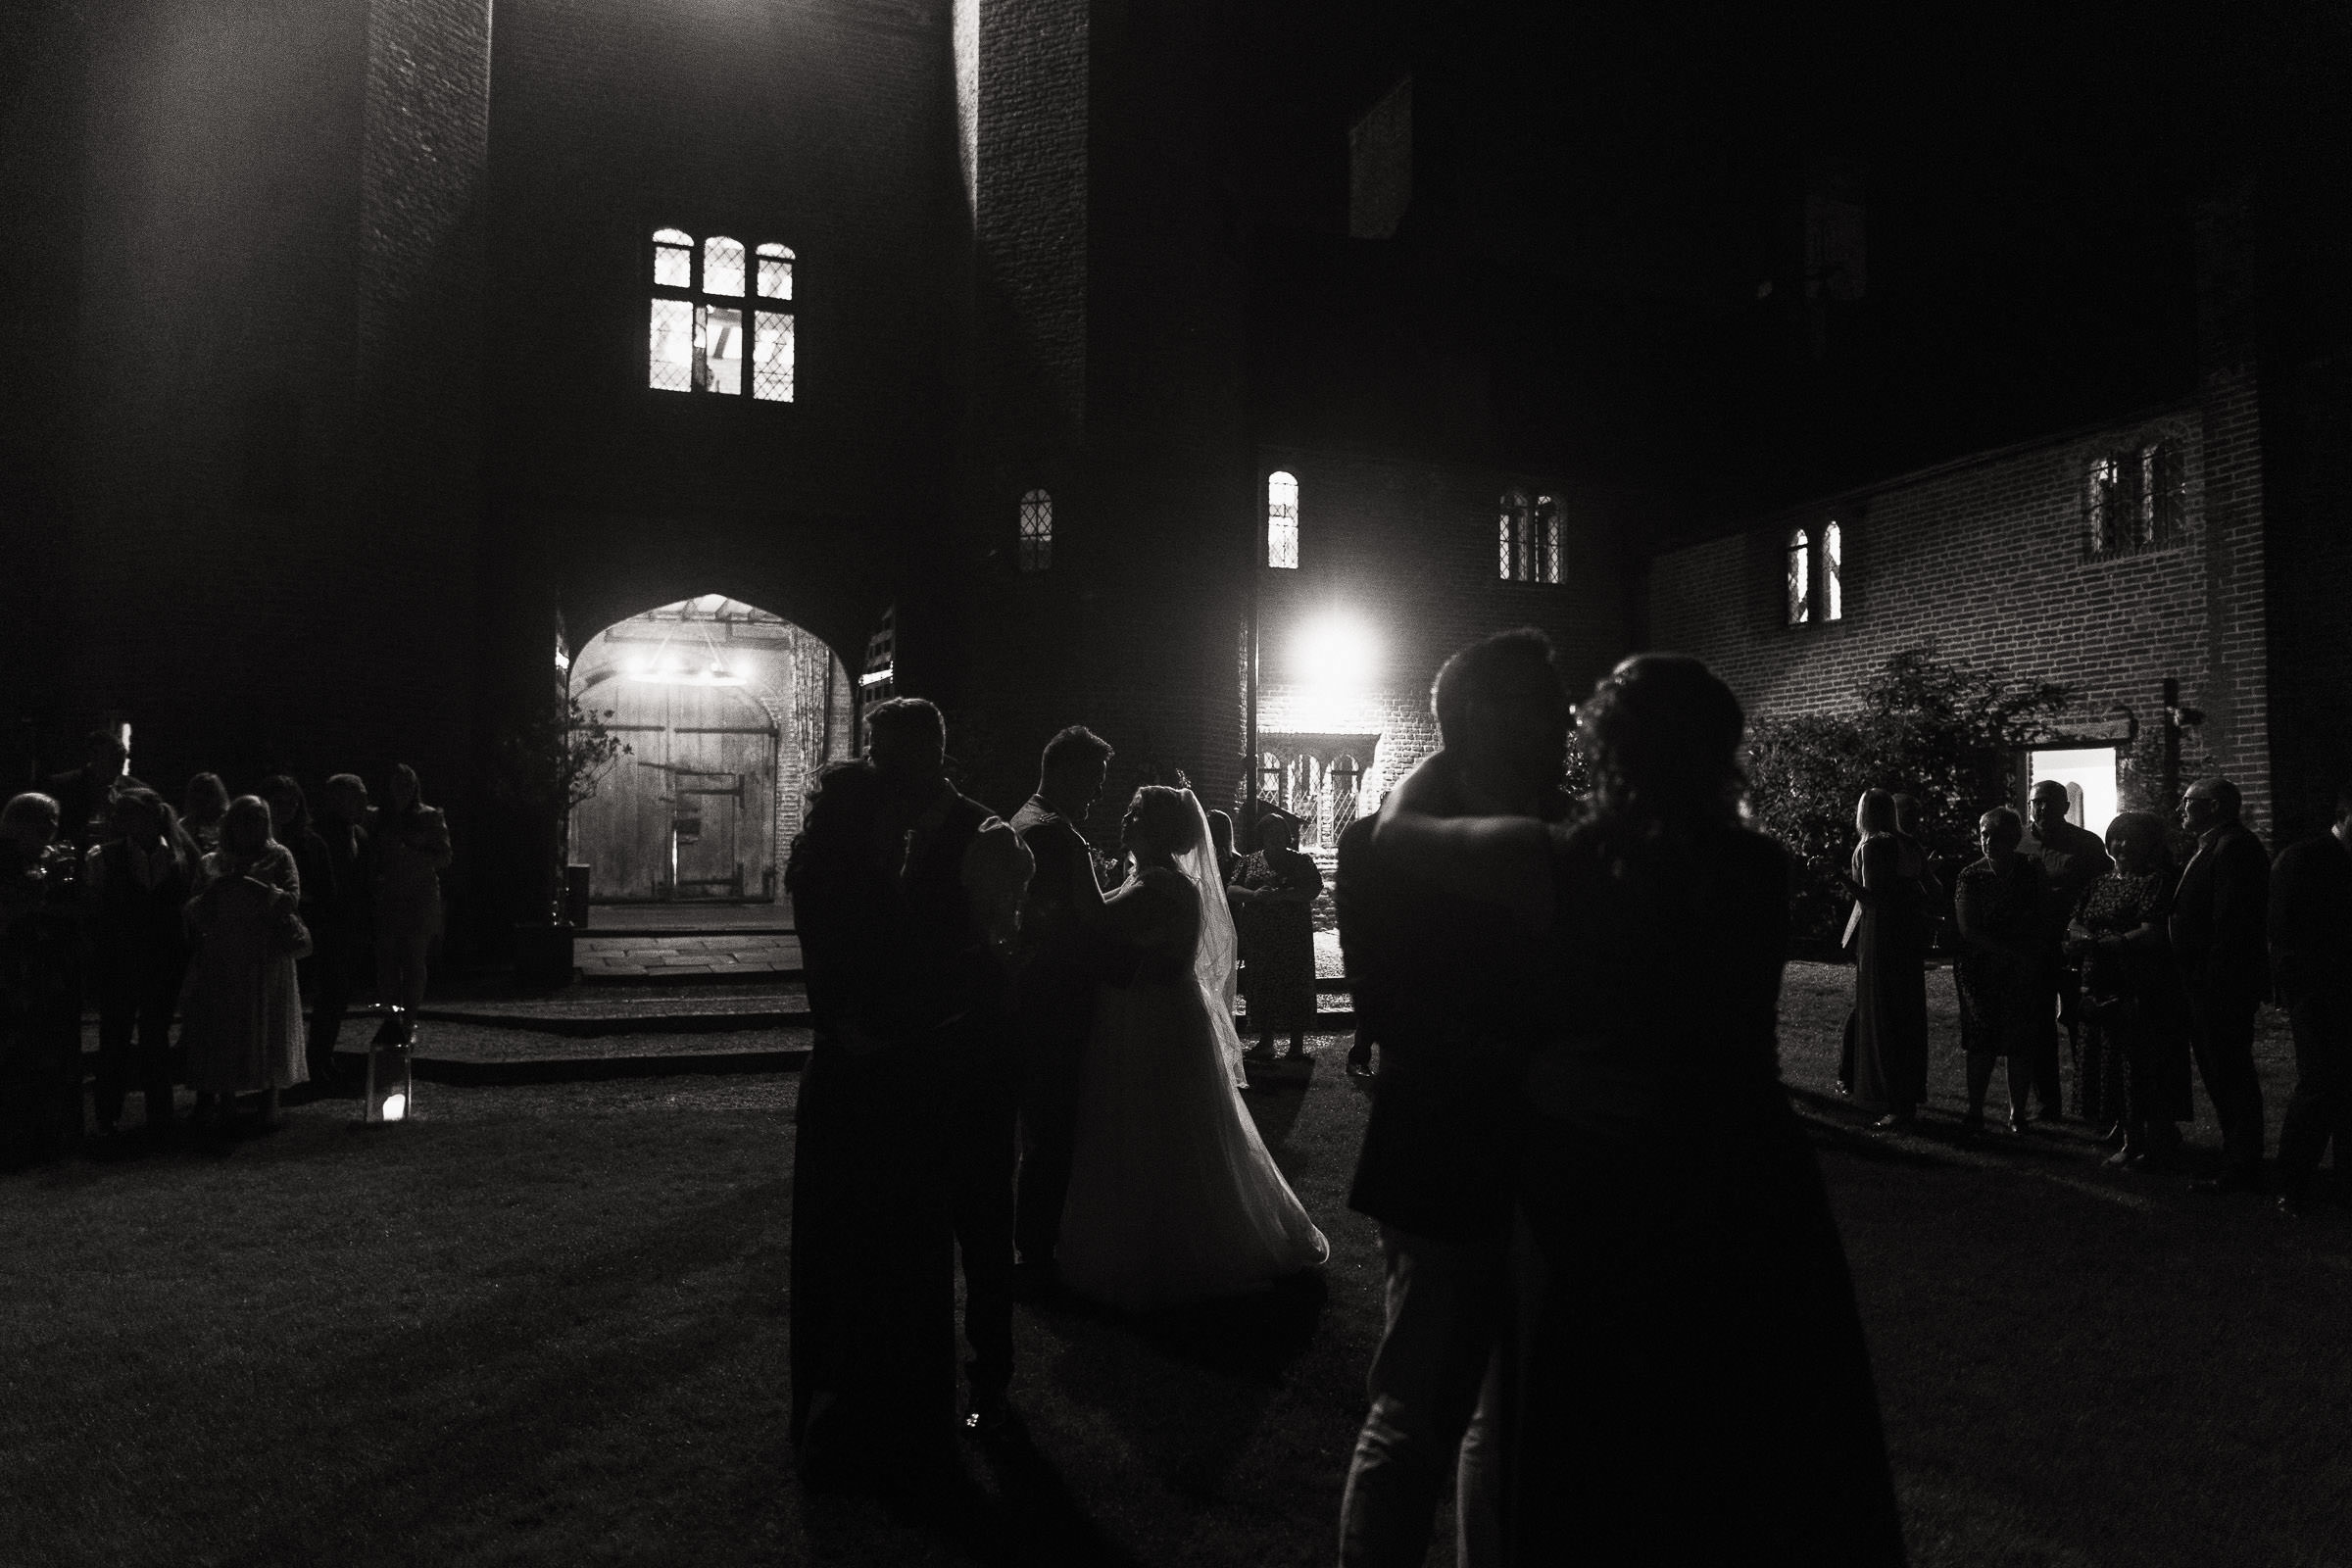 In the evening a bride and groom are having their first dance outside on the lawn at their wedding reception. Their friends and family have joined in with the slow dance. They are illuminated by the light from the Leez Priory carriageway.